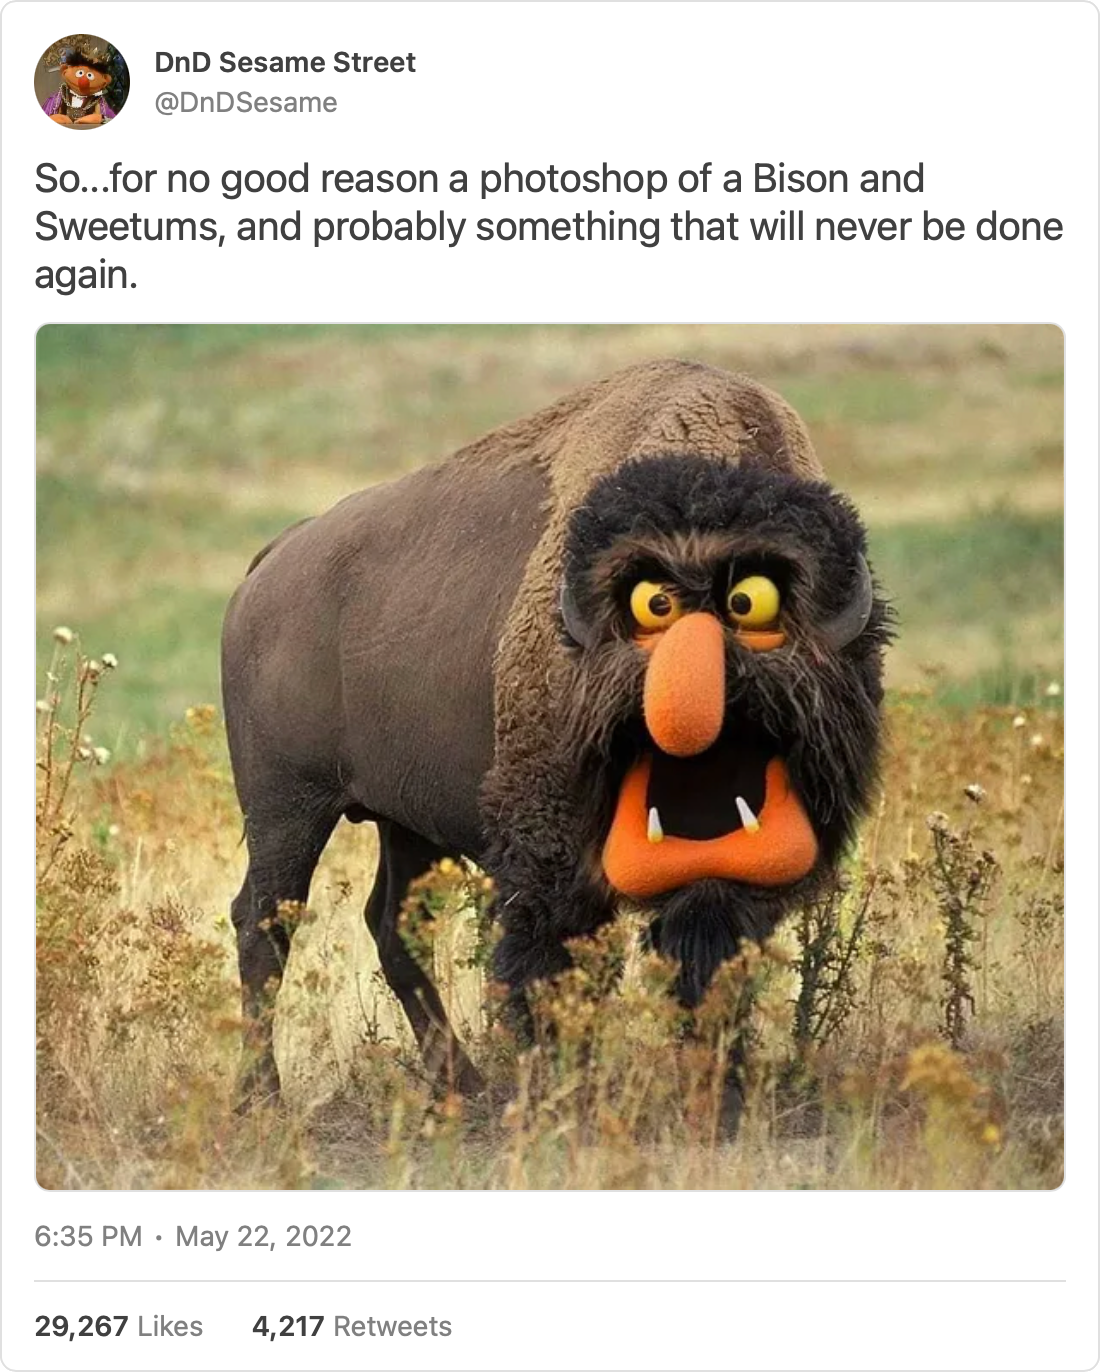 a photoshop of Bison and Sweetums